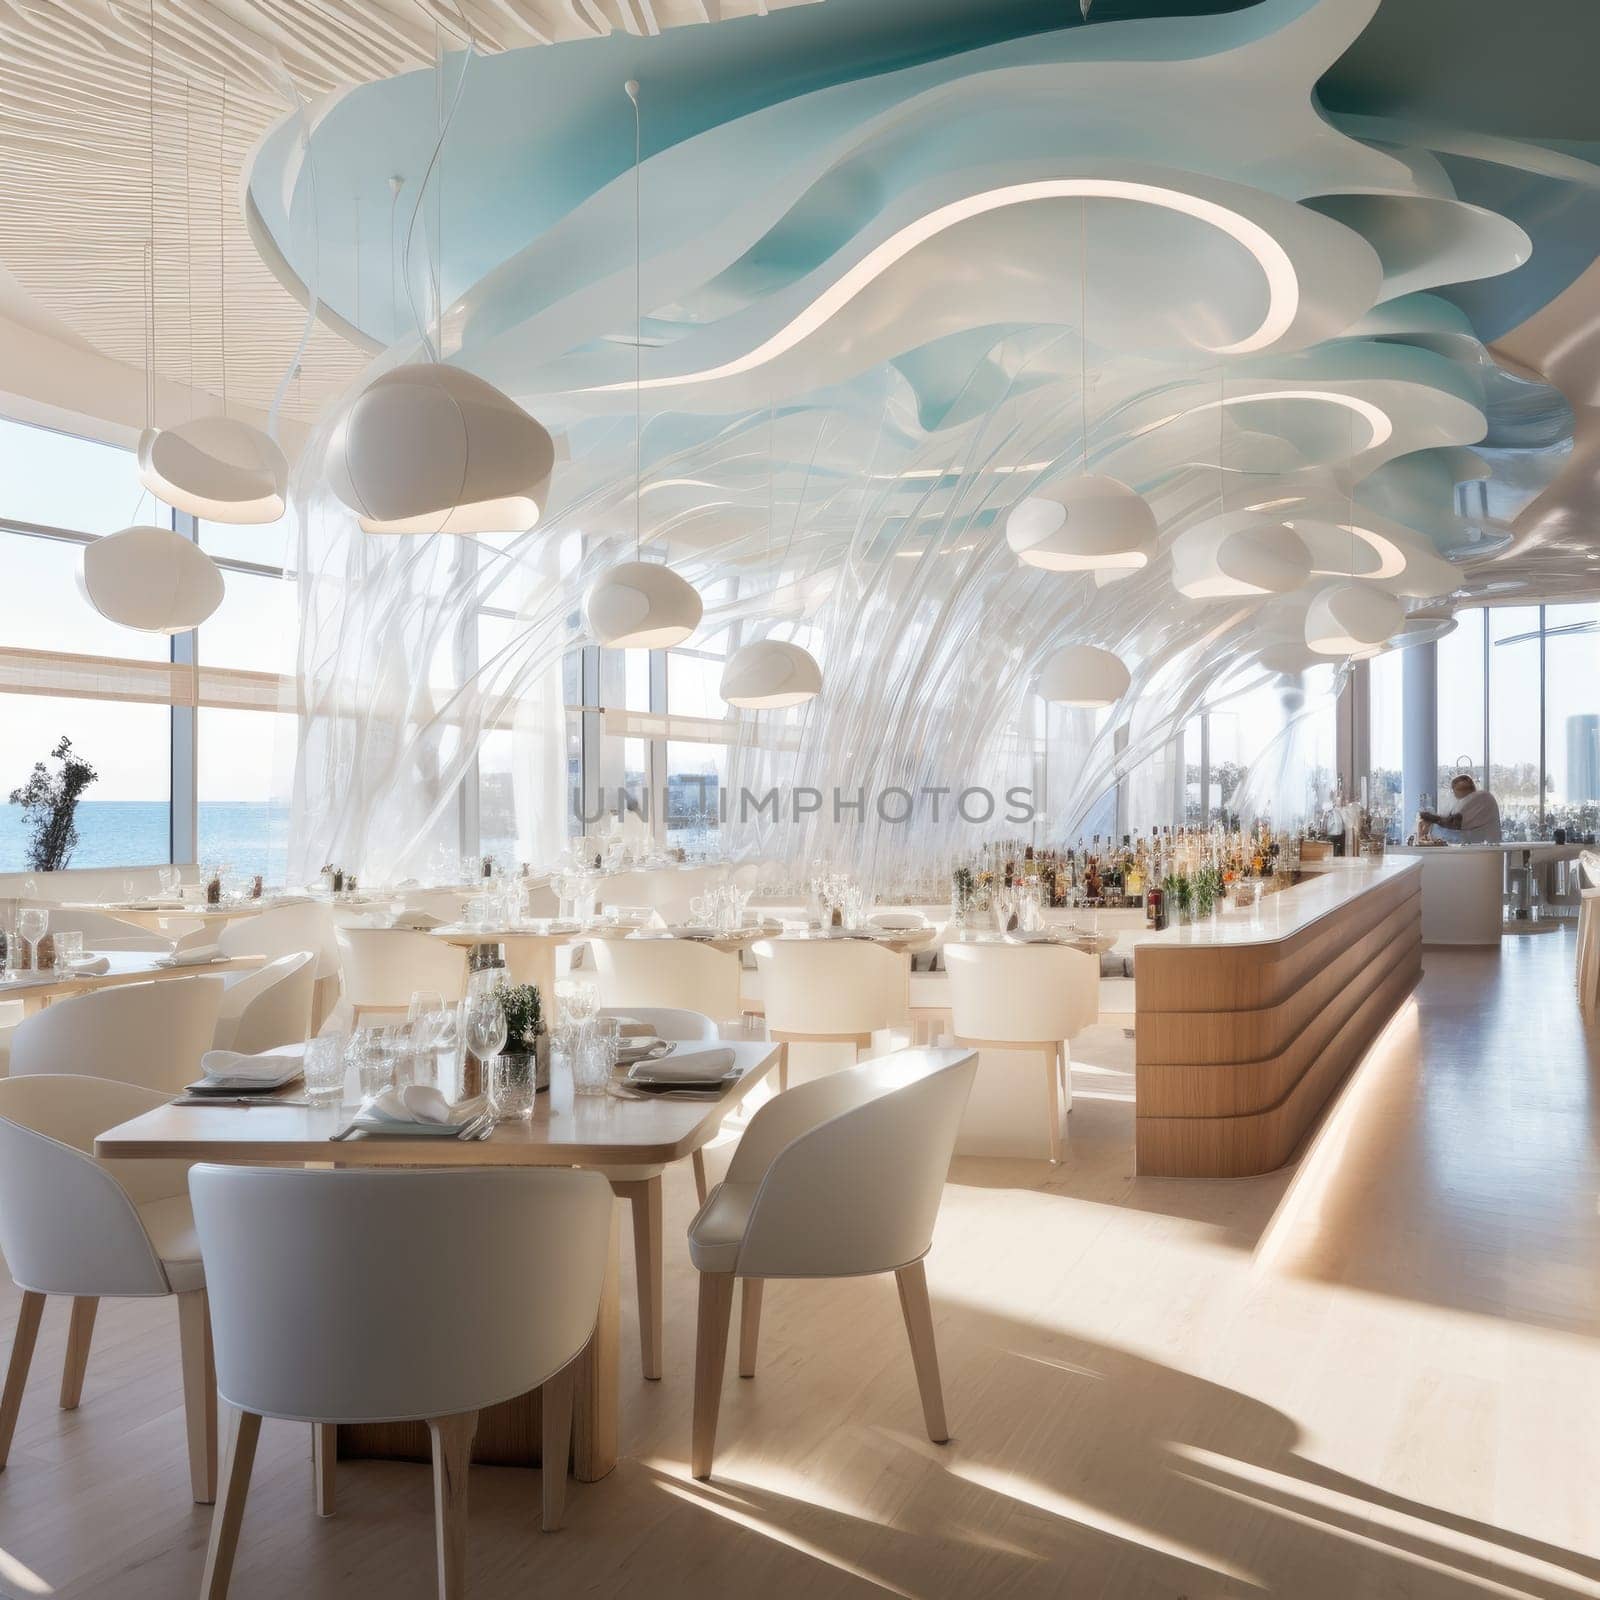 The interior of the seafood restaurant by cherezoff